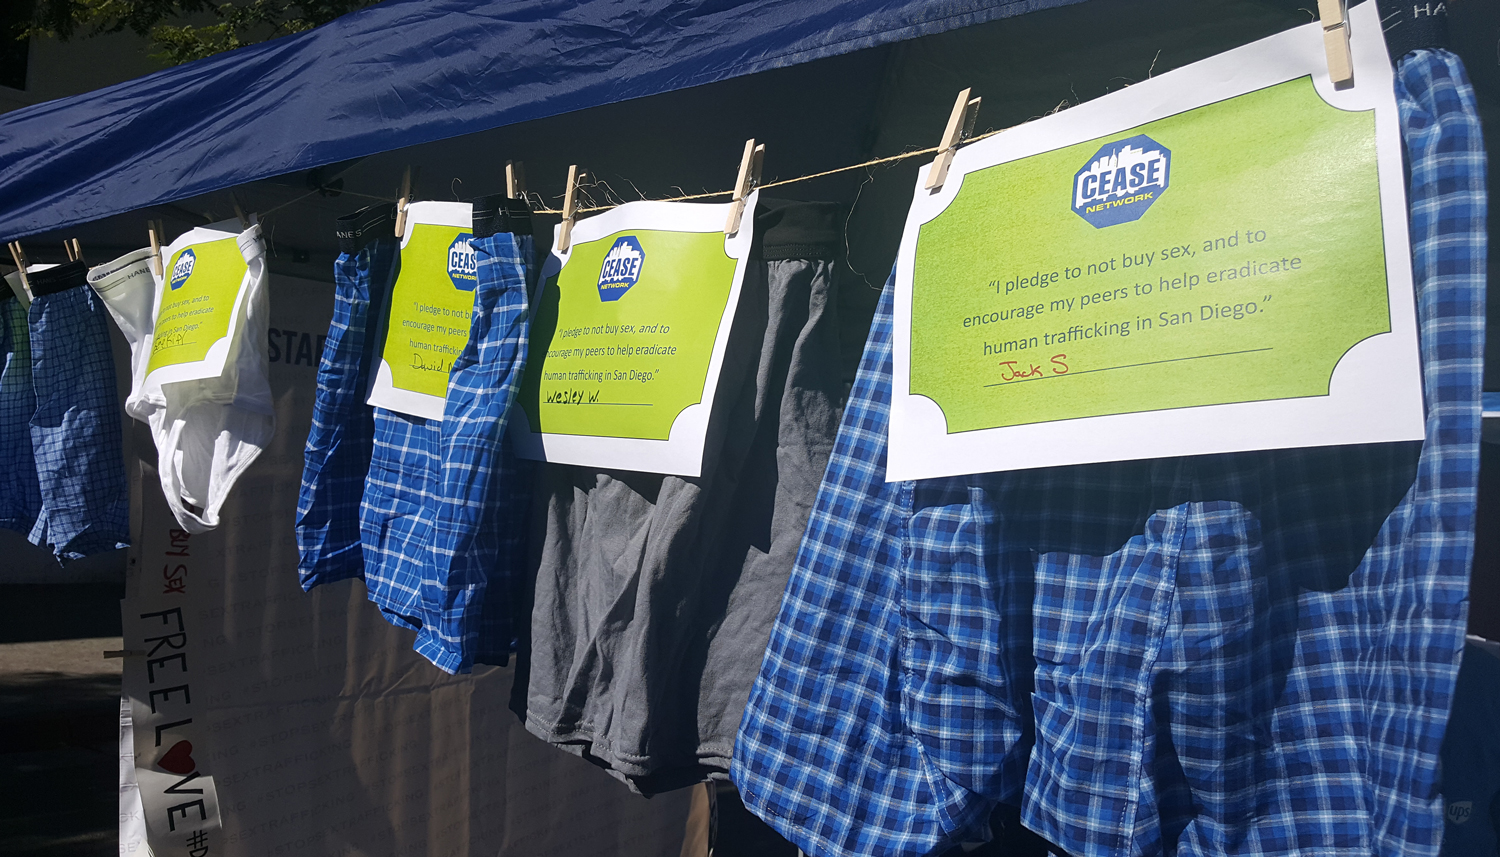 Photo of Cease Network Booth selling underwear to stand up against Human Trafficking at the Freedom Now Fair.